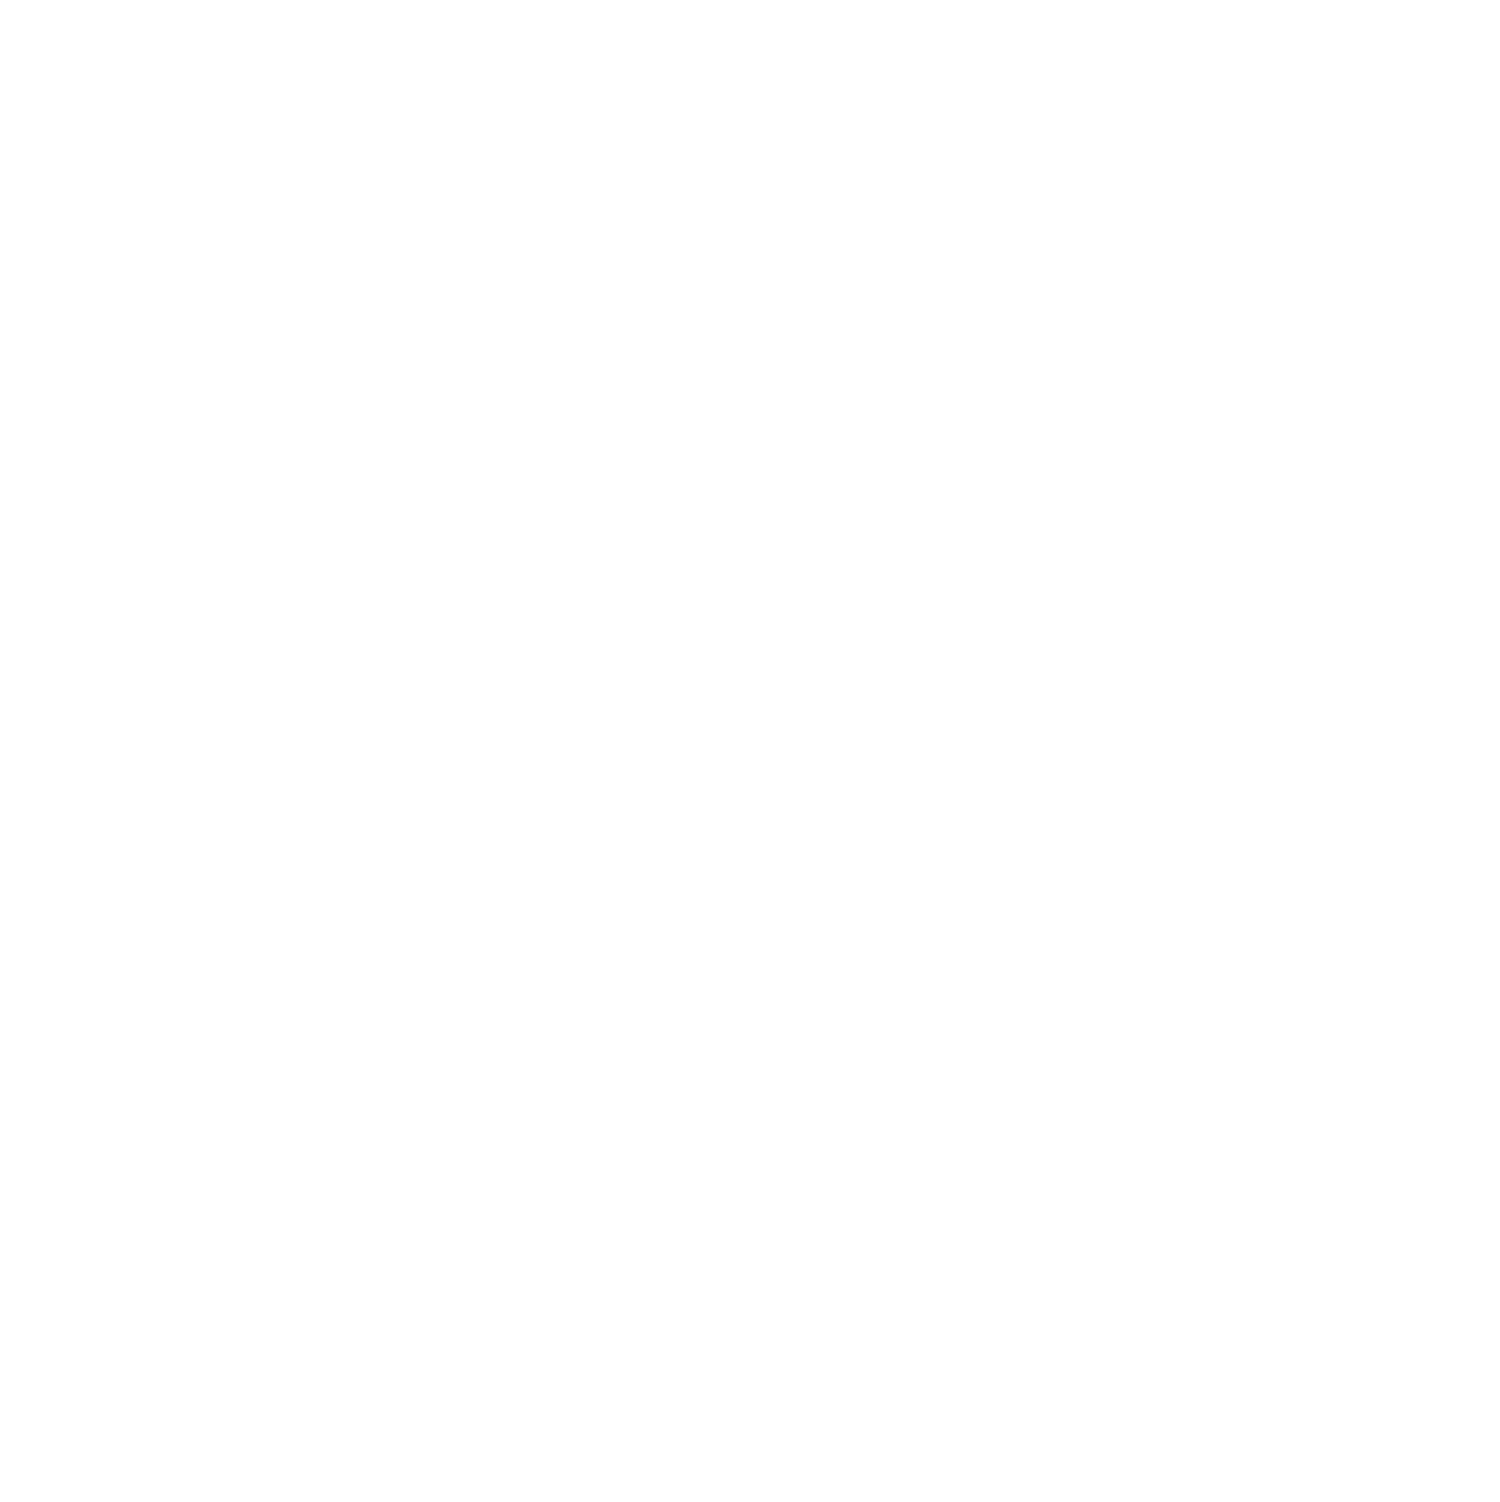 CIVIC Savvy - Social Media Management for Government &amp; Elected Officials